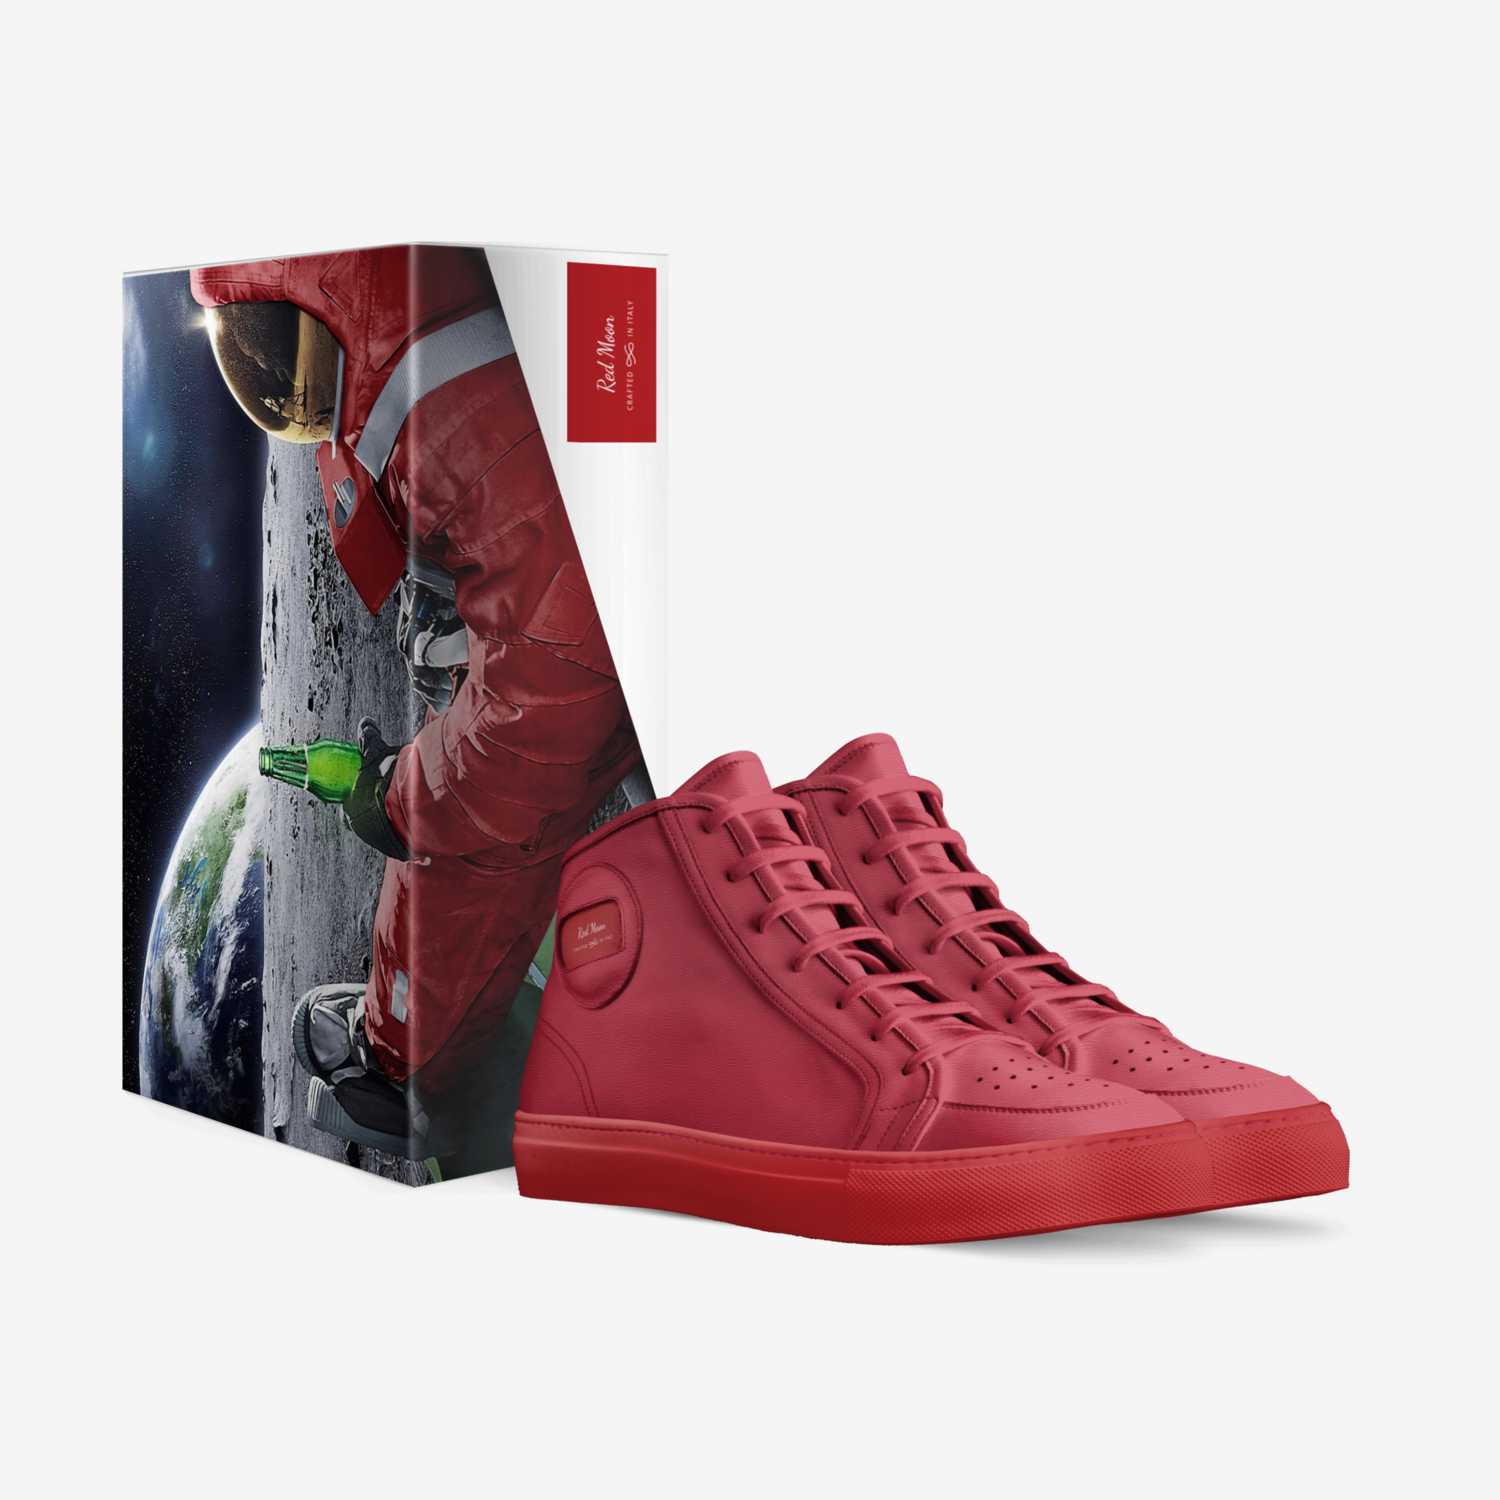 Red Moon custom made in Italy shoes by Antwan Banger | Box view